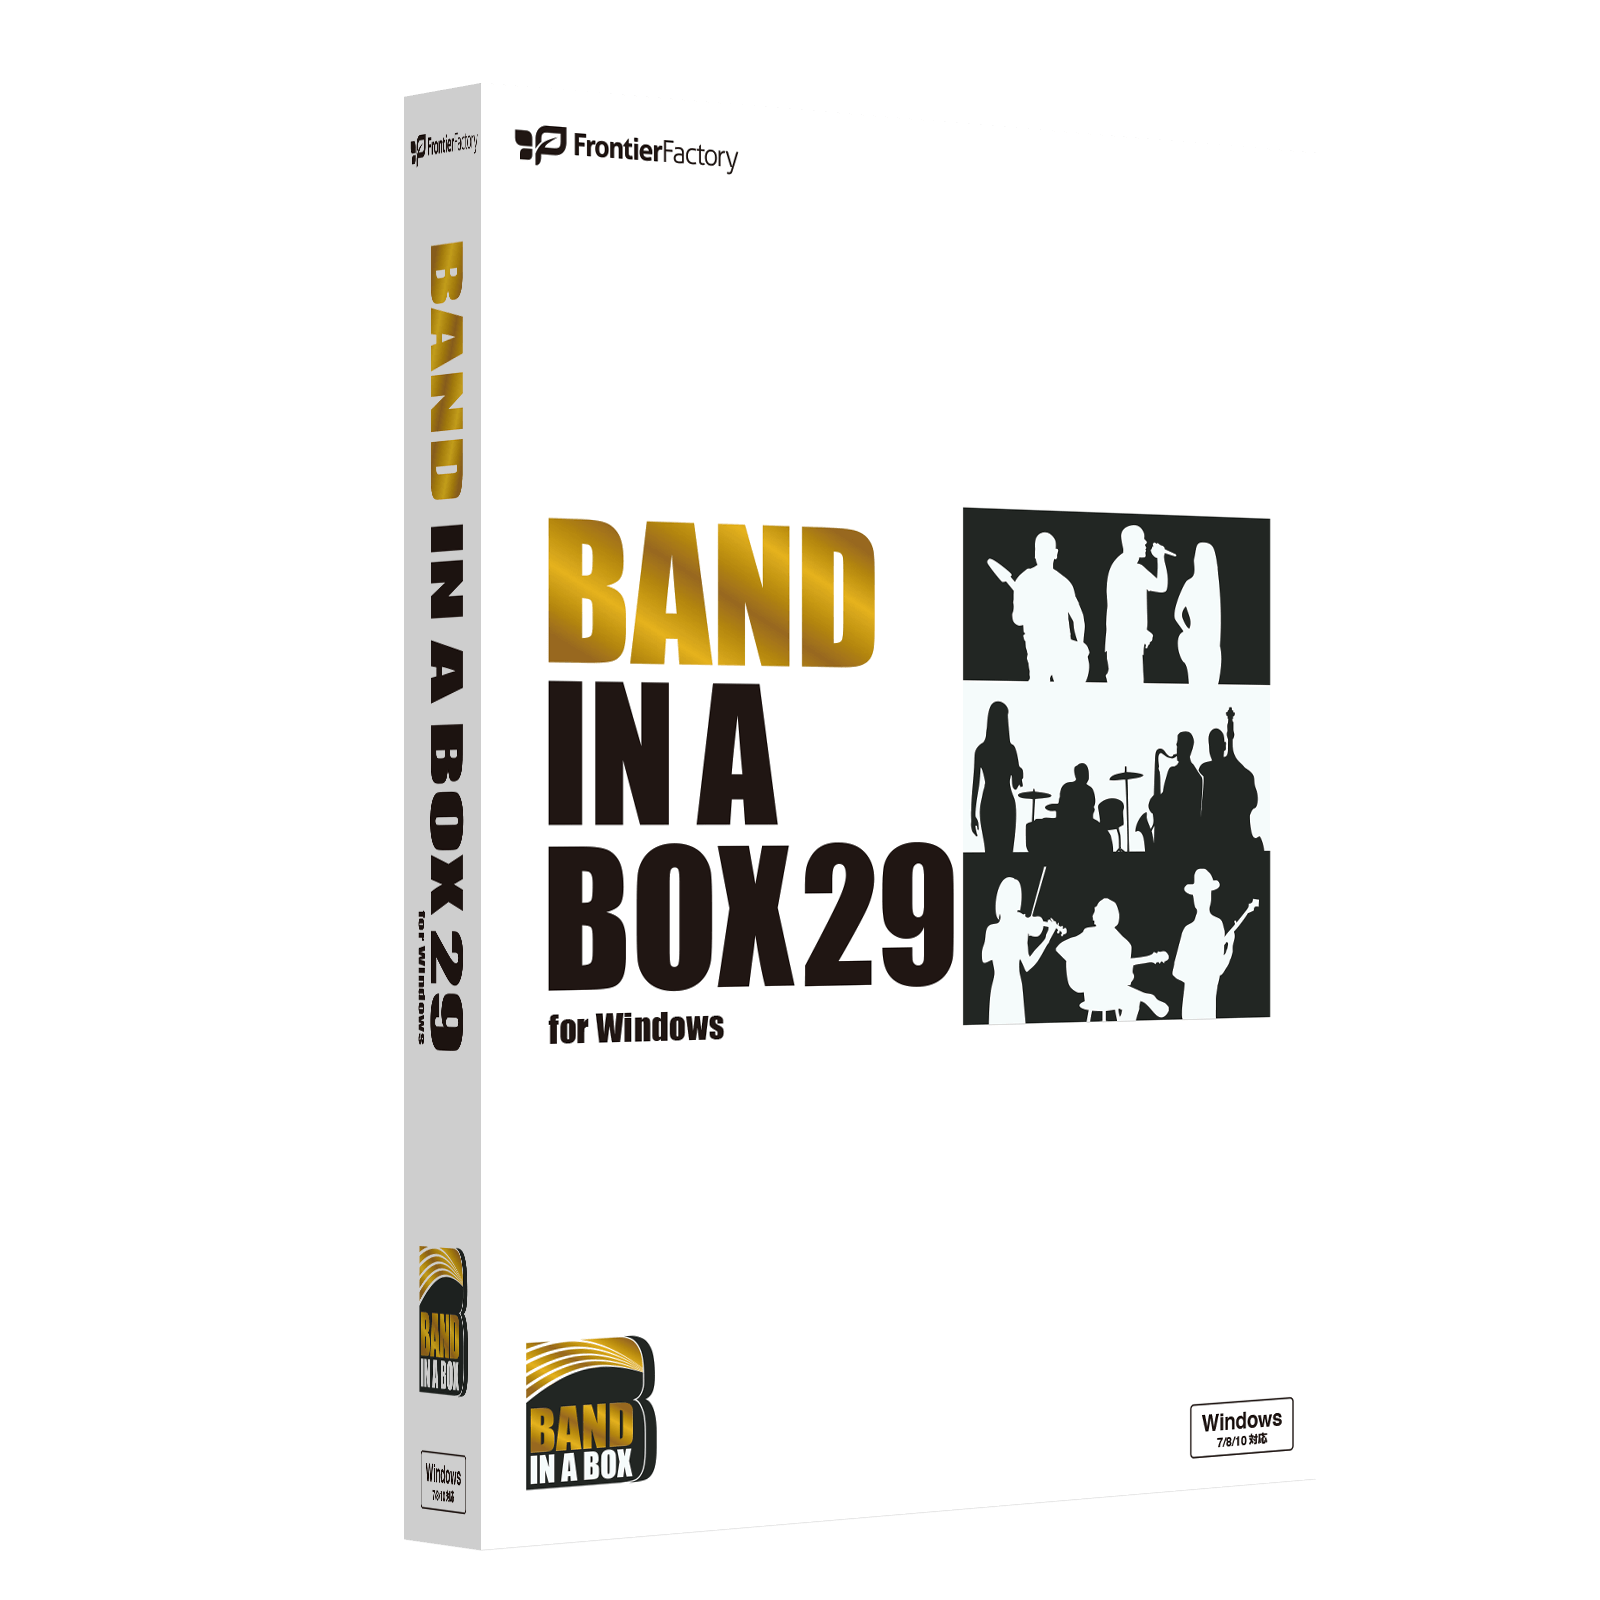 Band-in-a-Box 29 for Windows